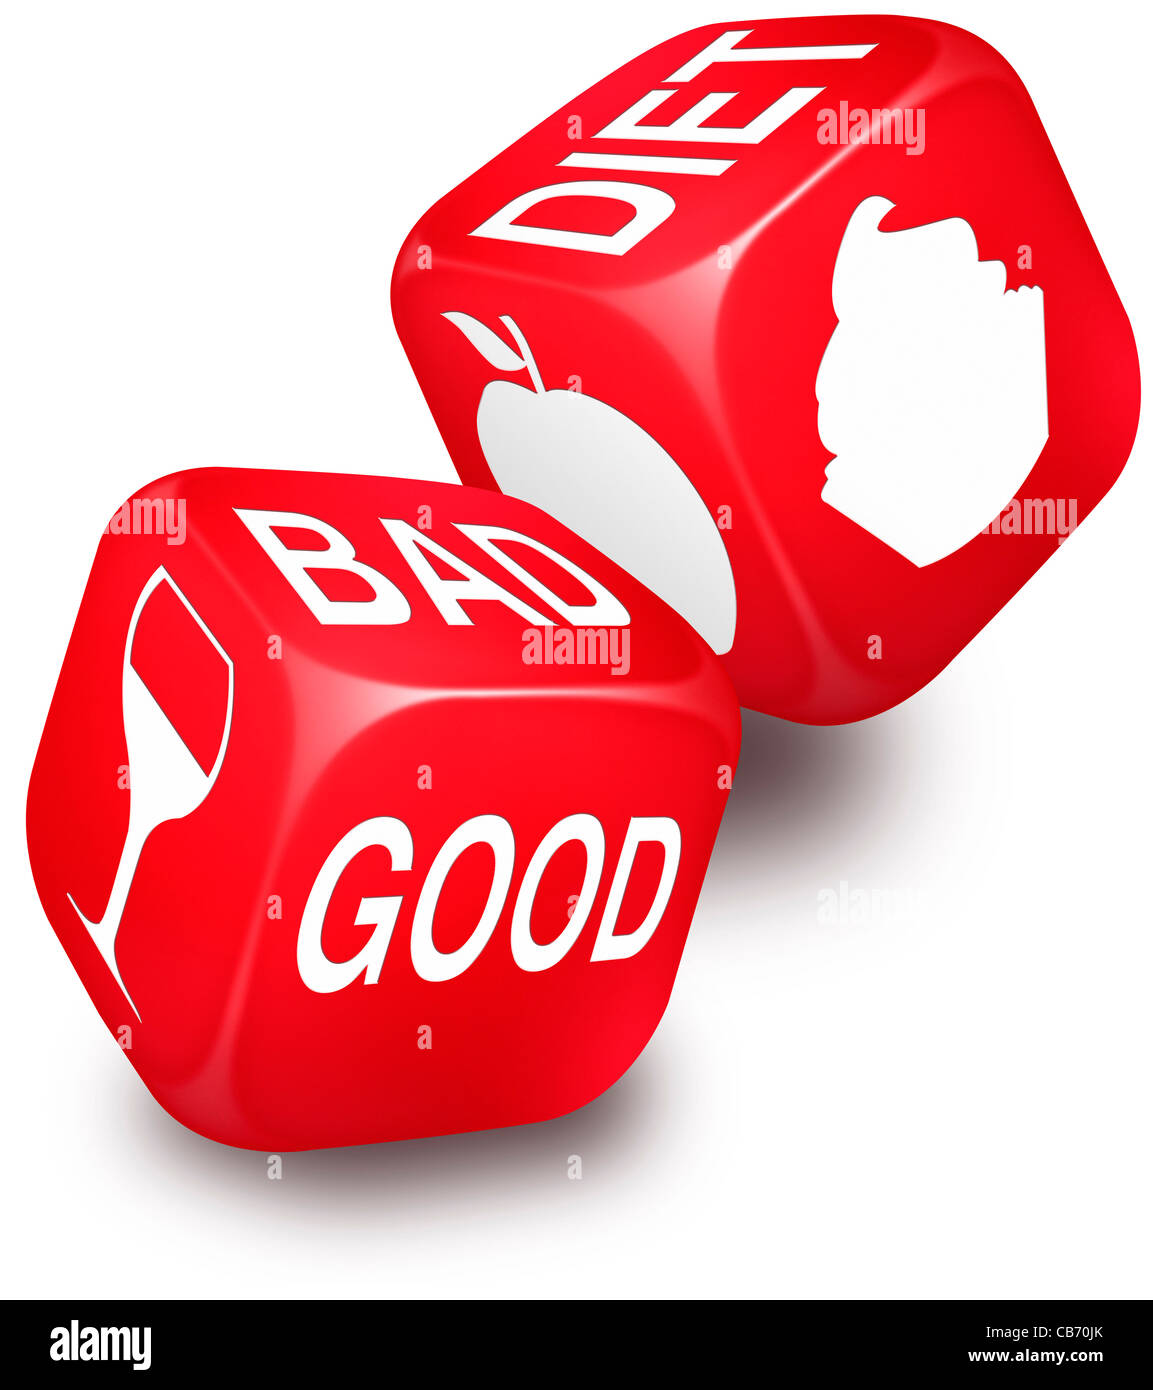 Pair of red dice with the words GOOD, BAD and DIET and the symbols for wine, an apple and a cupcake printed on it's sides. Stock Photo